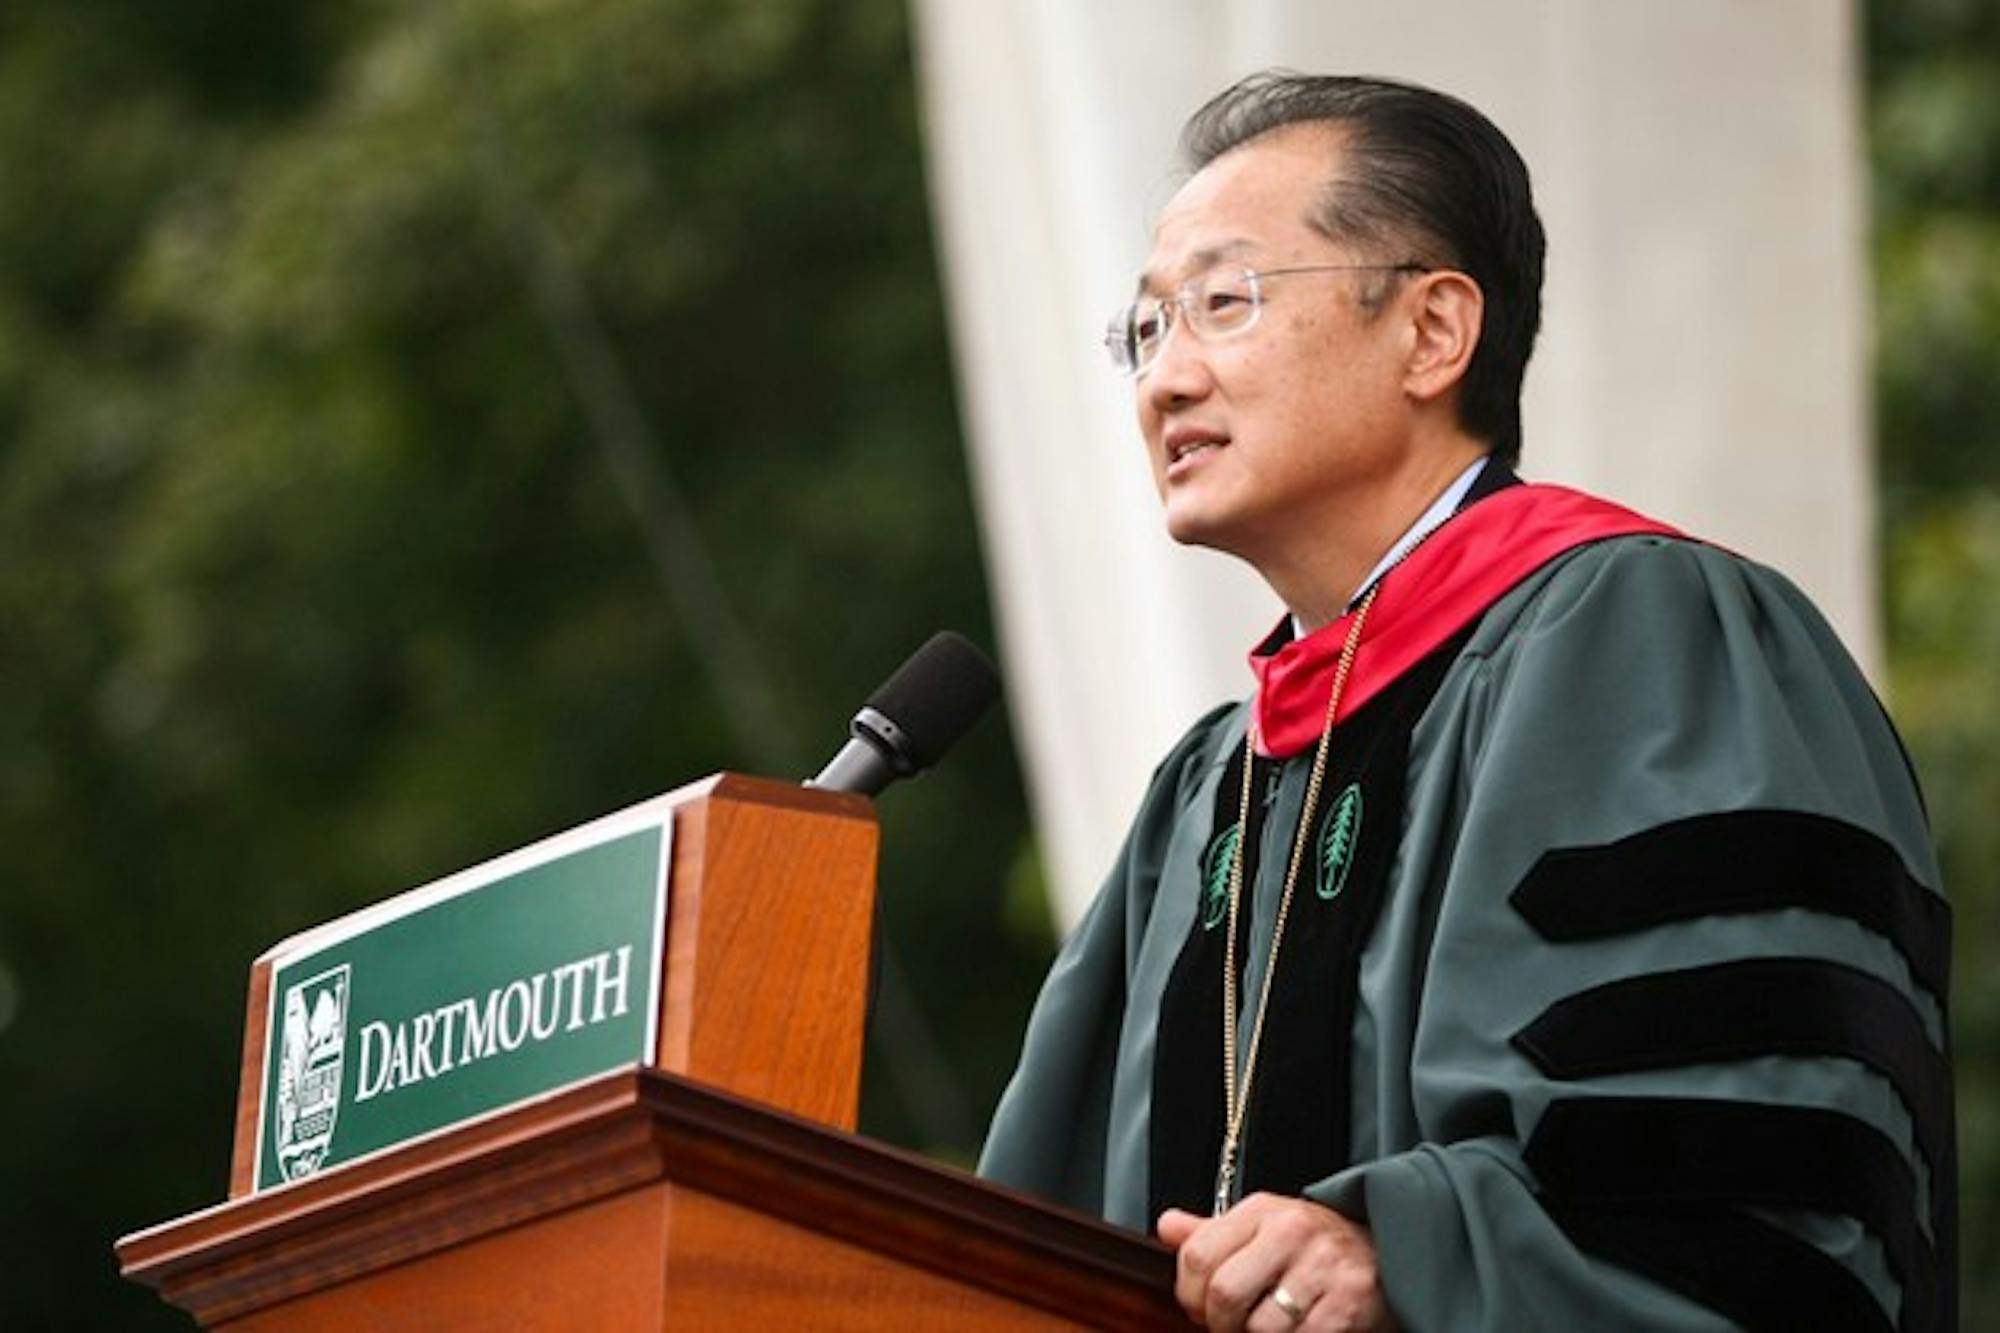 The World Bank board of directors confirmed College President Jim Yong Kim as the next president of the Bank.